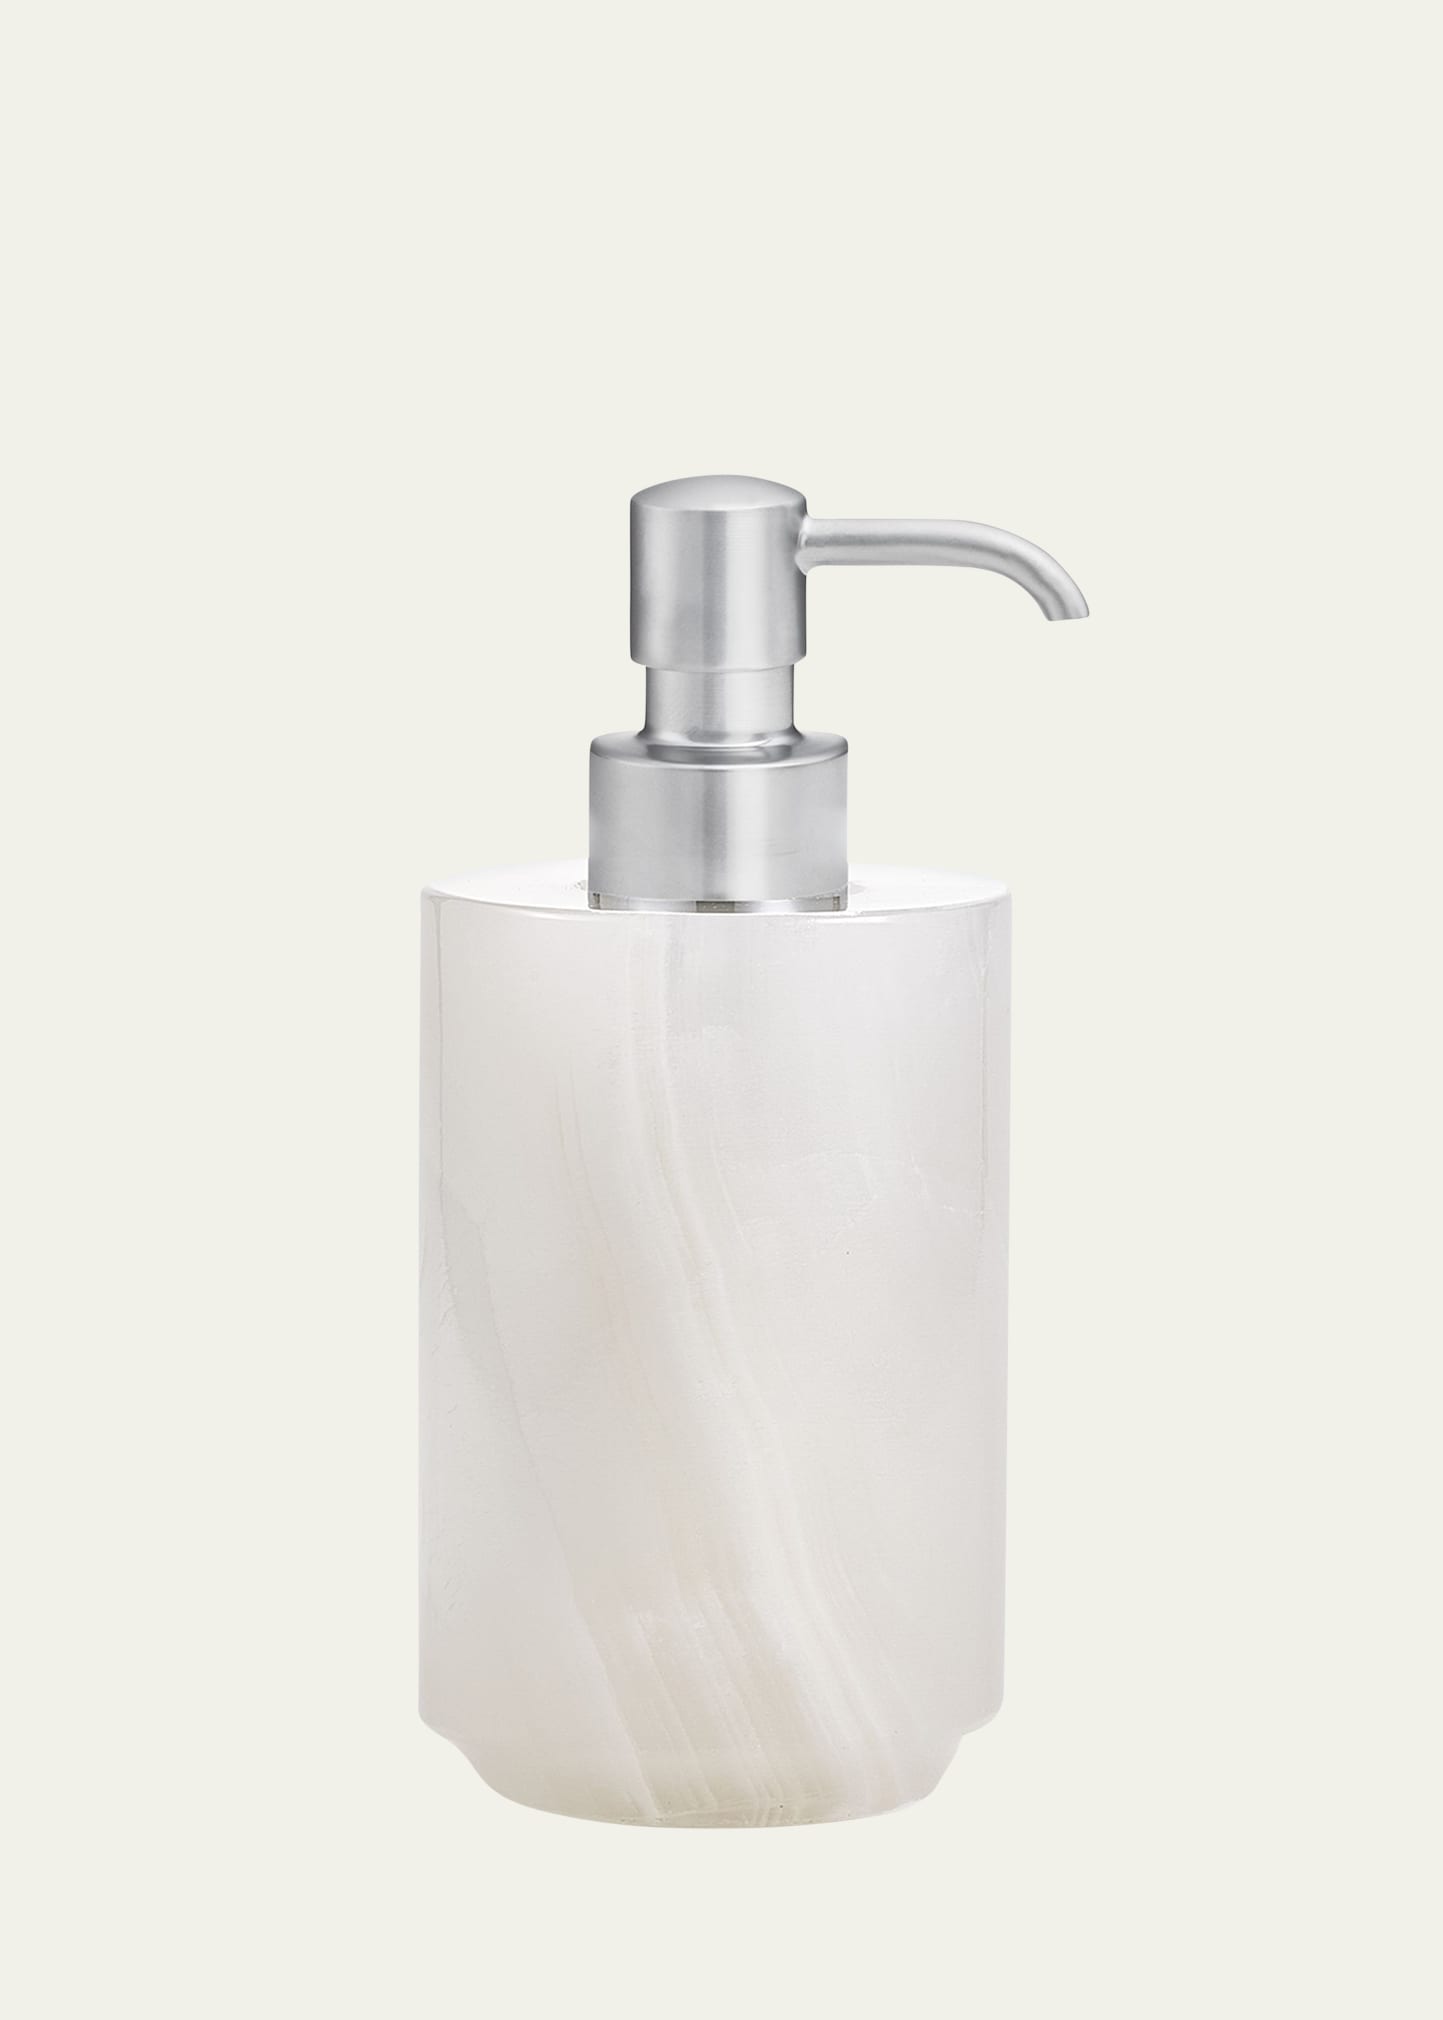 Hielo Pump Dispenser with Polished Nickel Pump